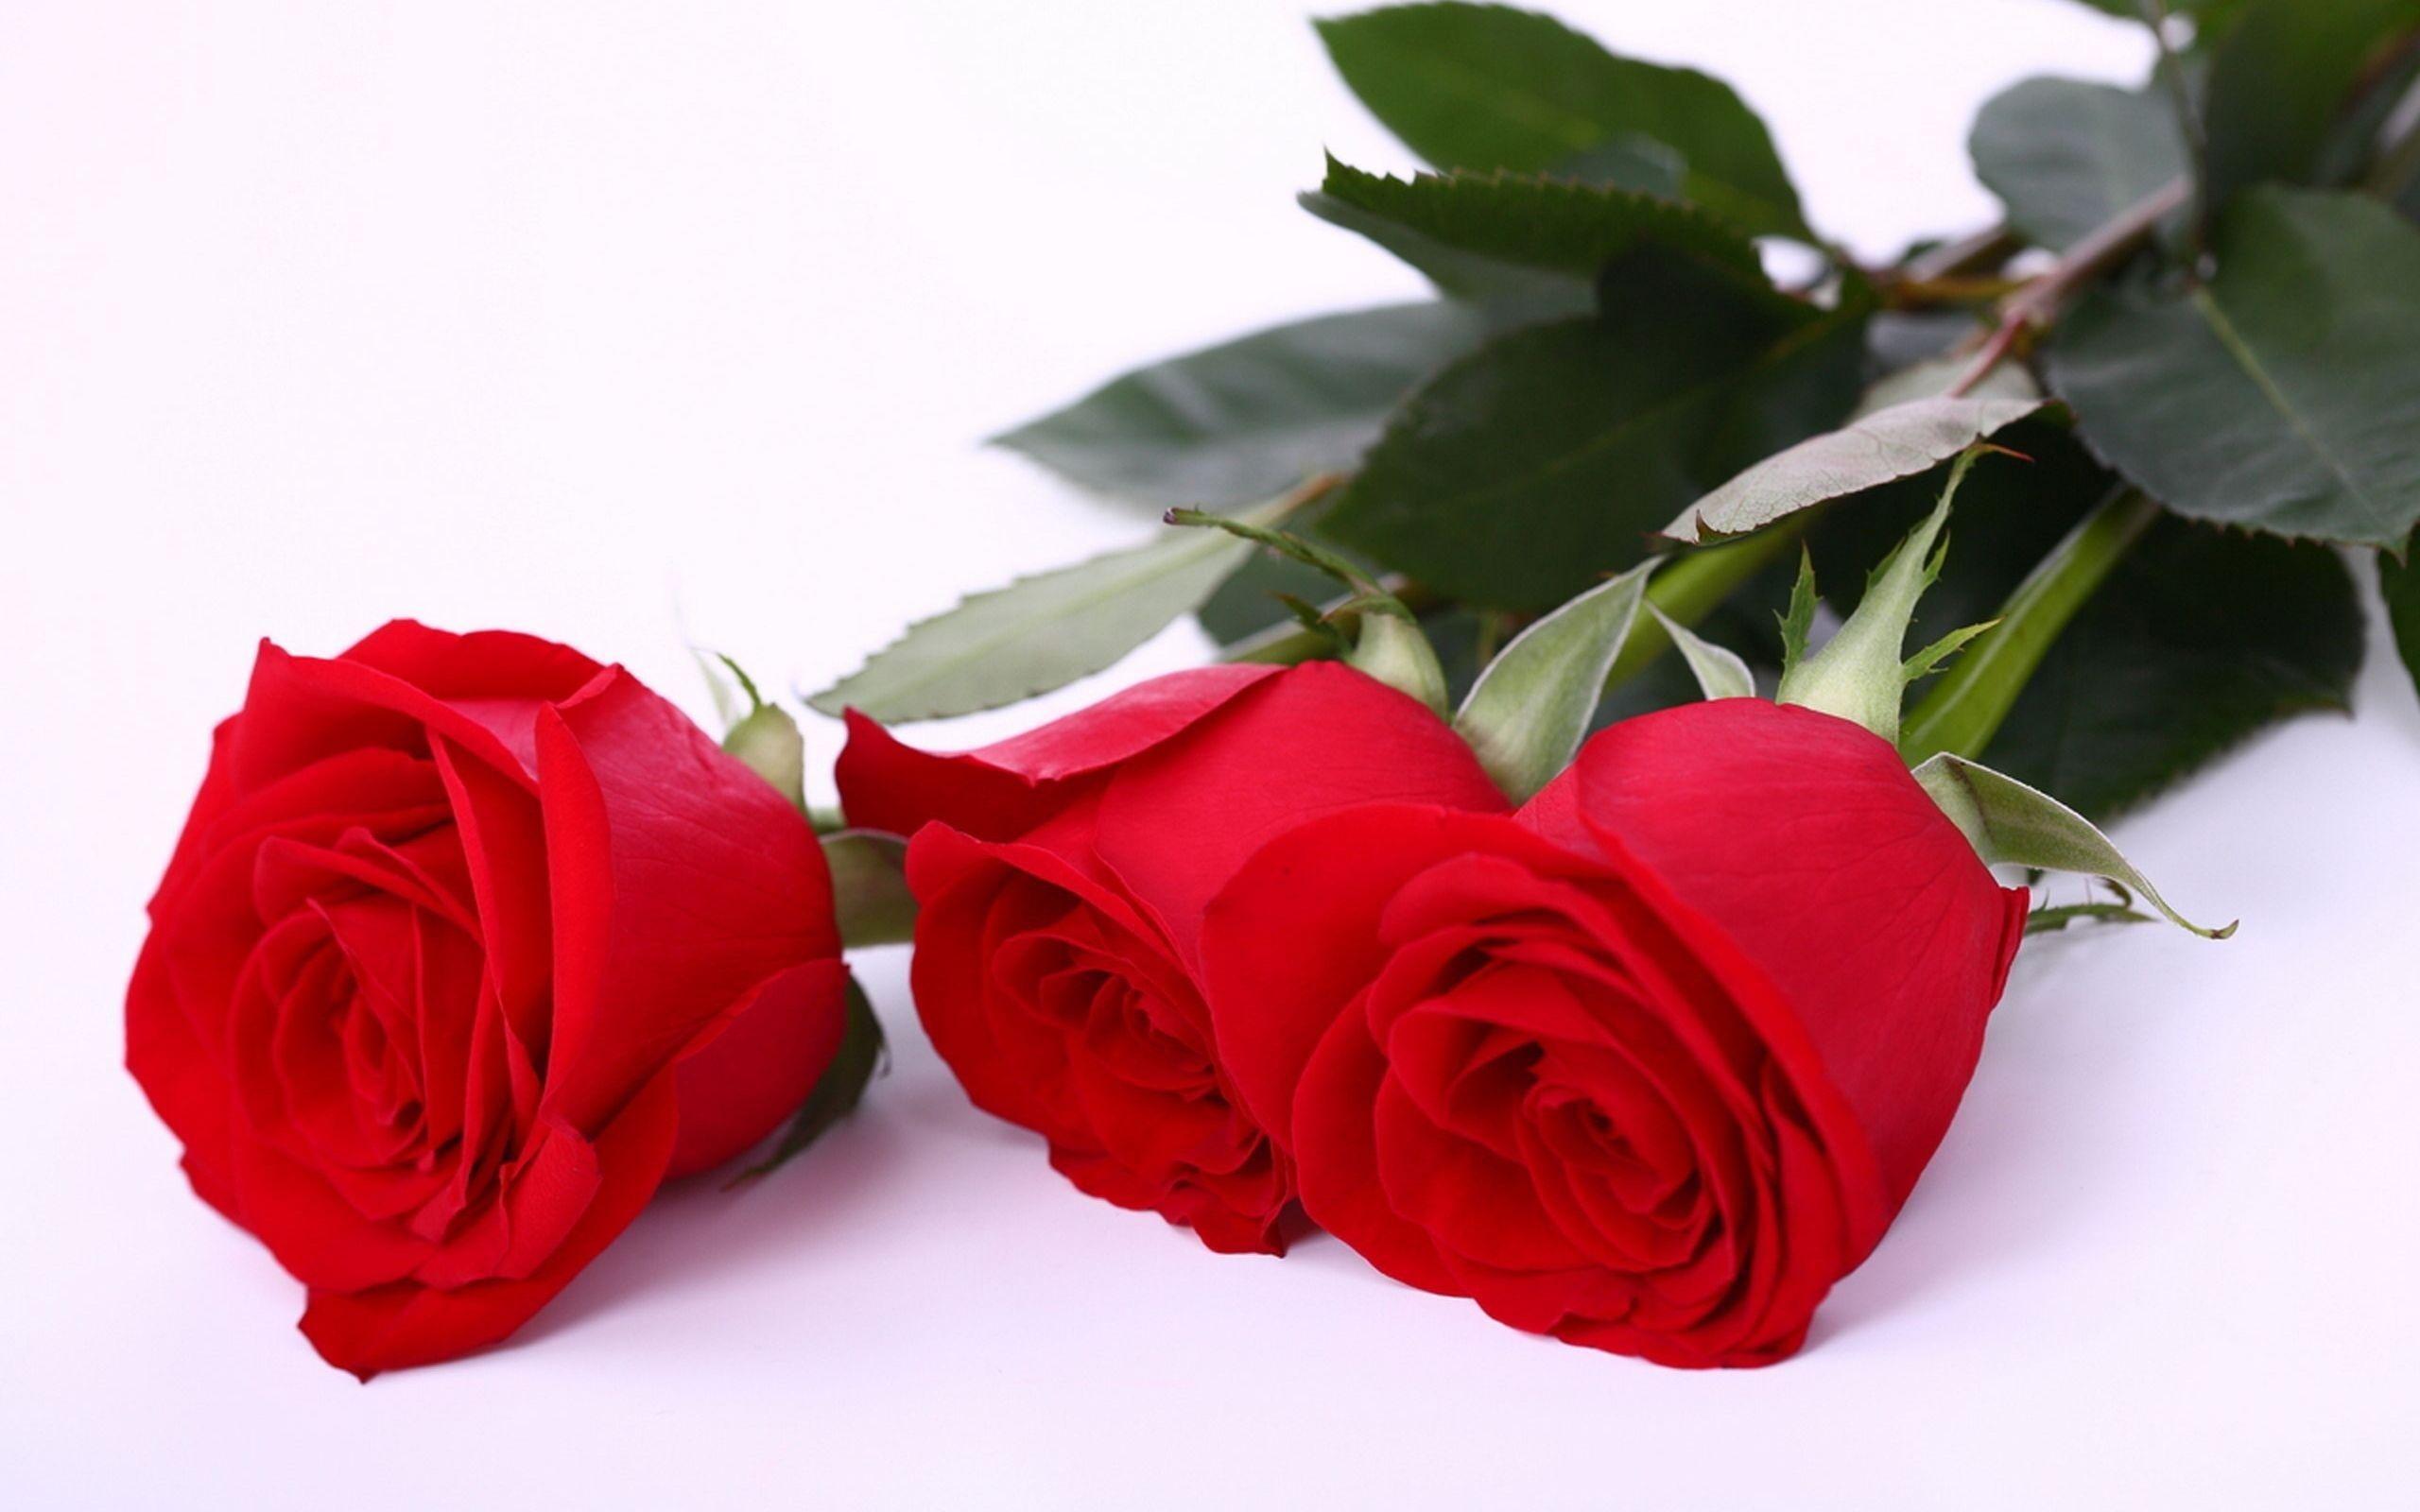 Wallpapers Of Red Roses - Wallpaper Cave